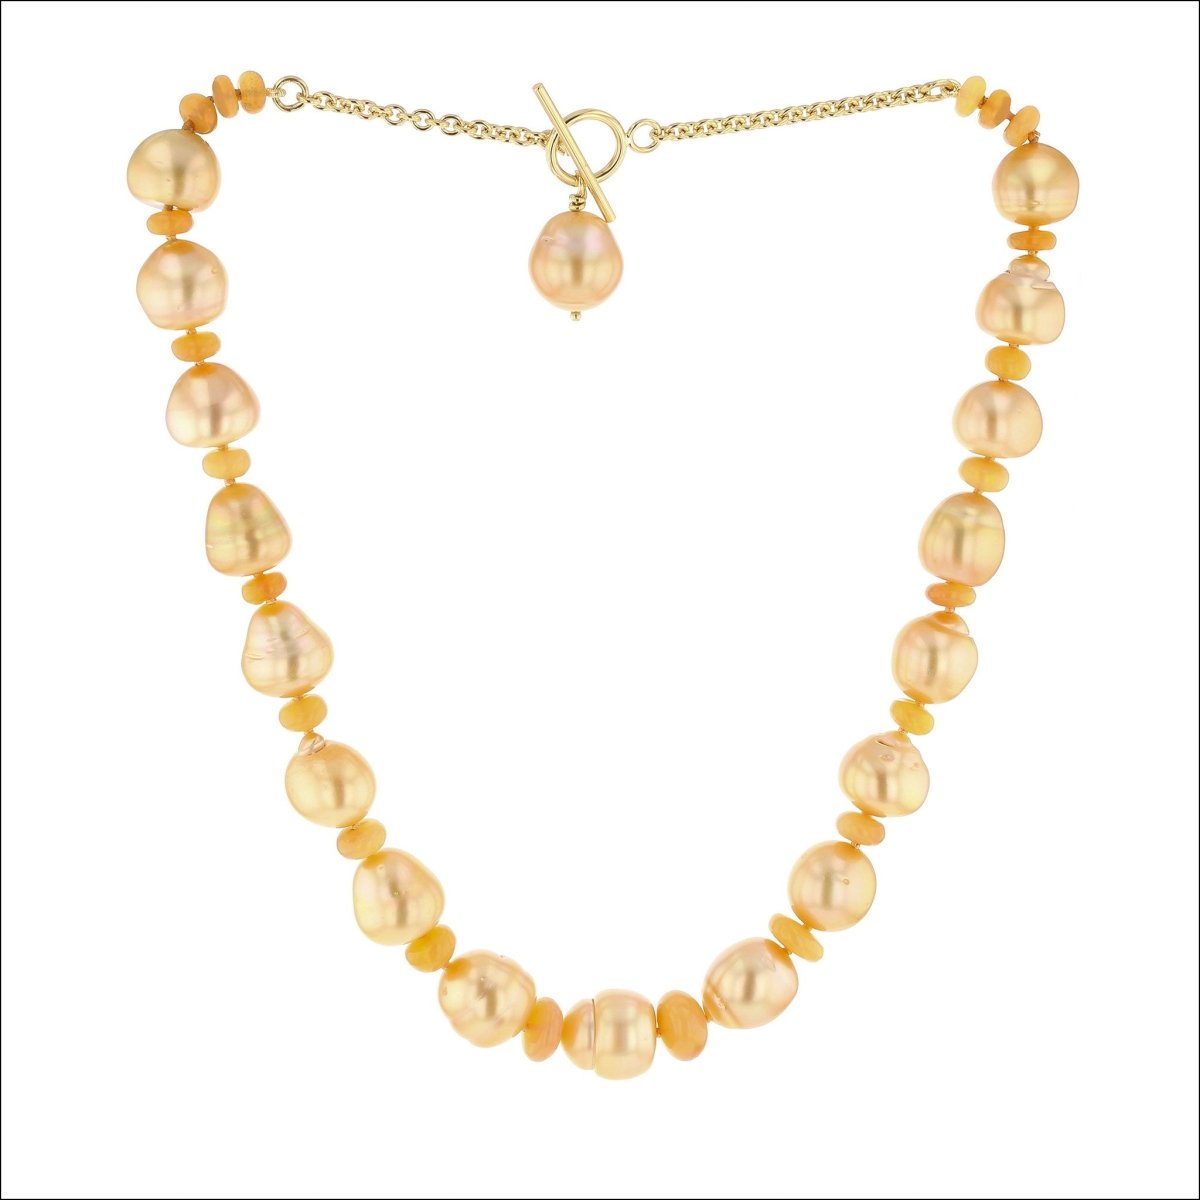 Golden South Sea Pearl Ethiopian Opal Necklace 16.5" 18KY (Consignment) - JewelsmithNecklaces